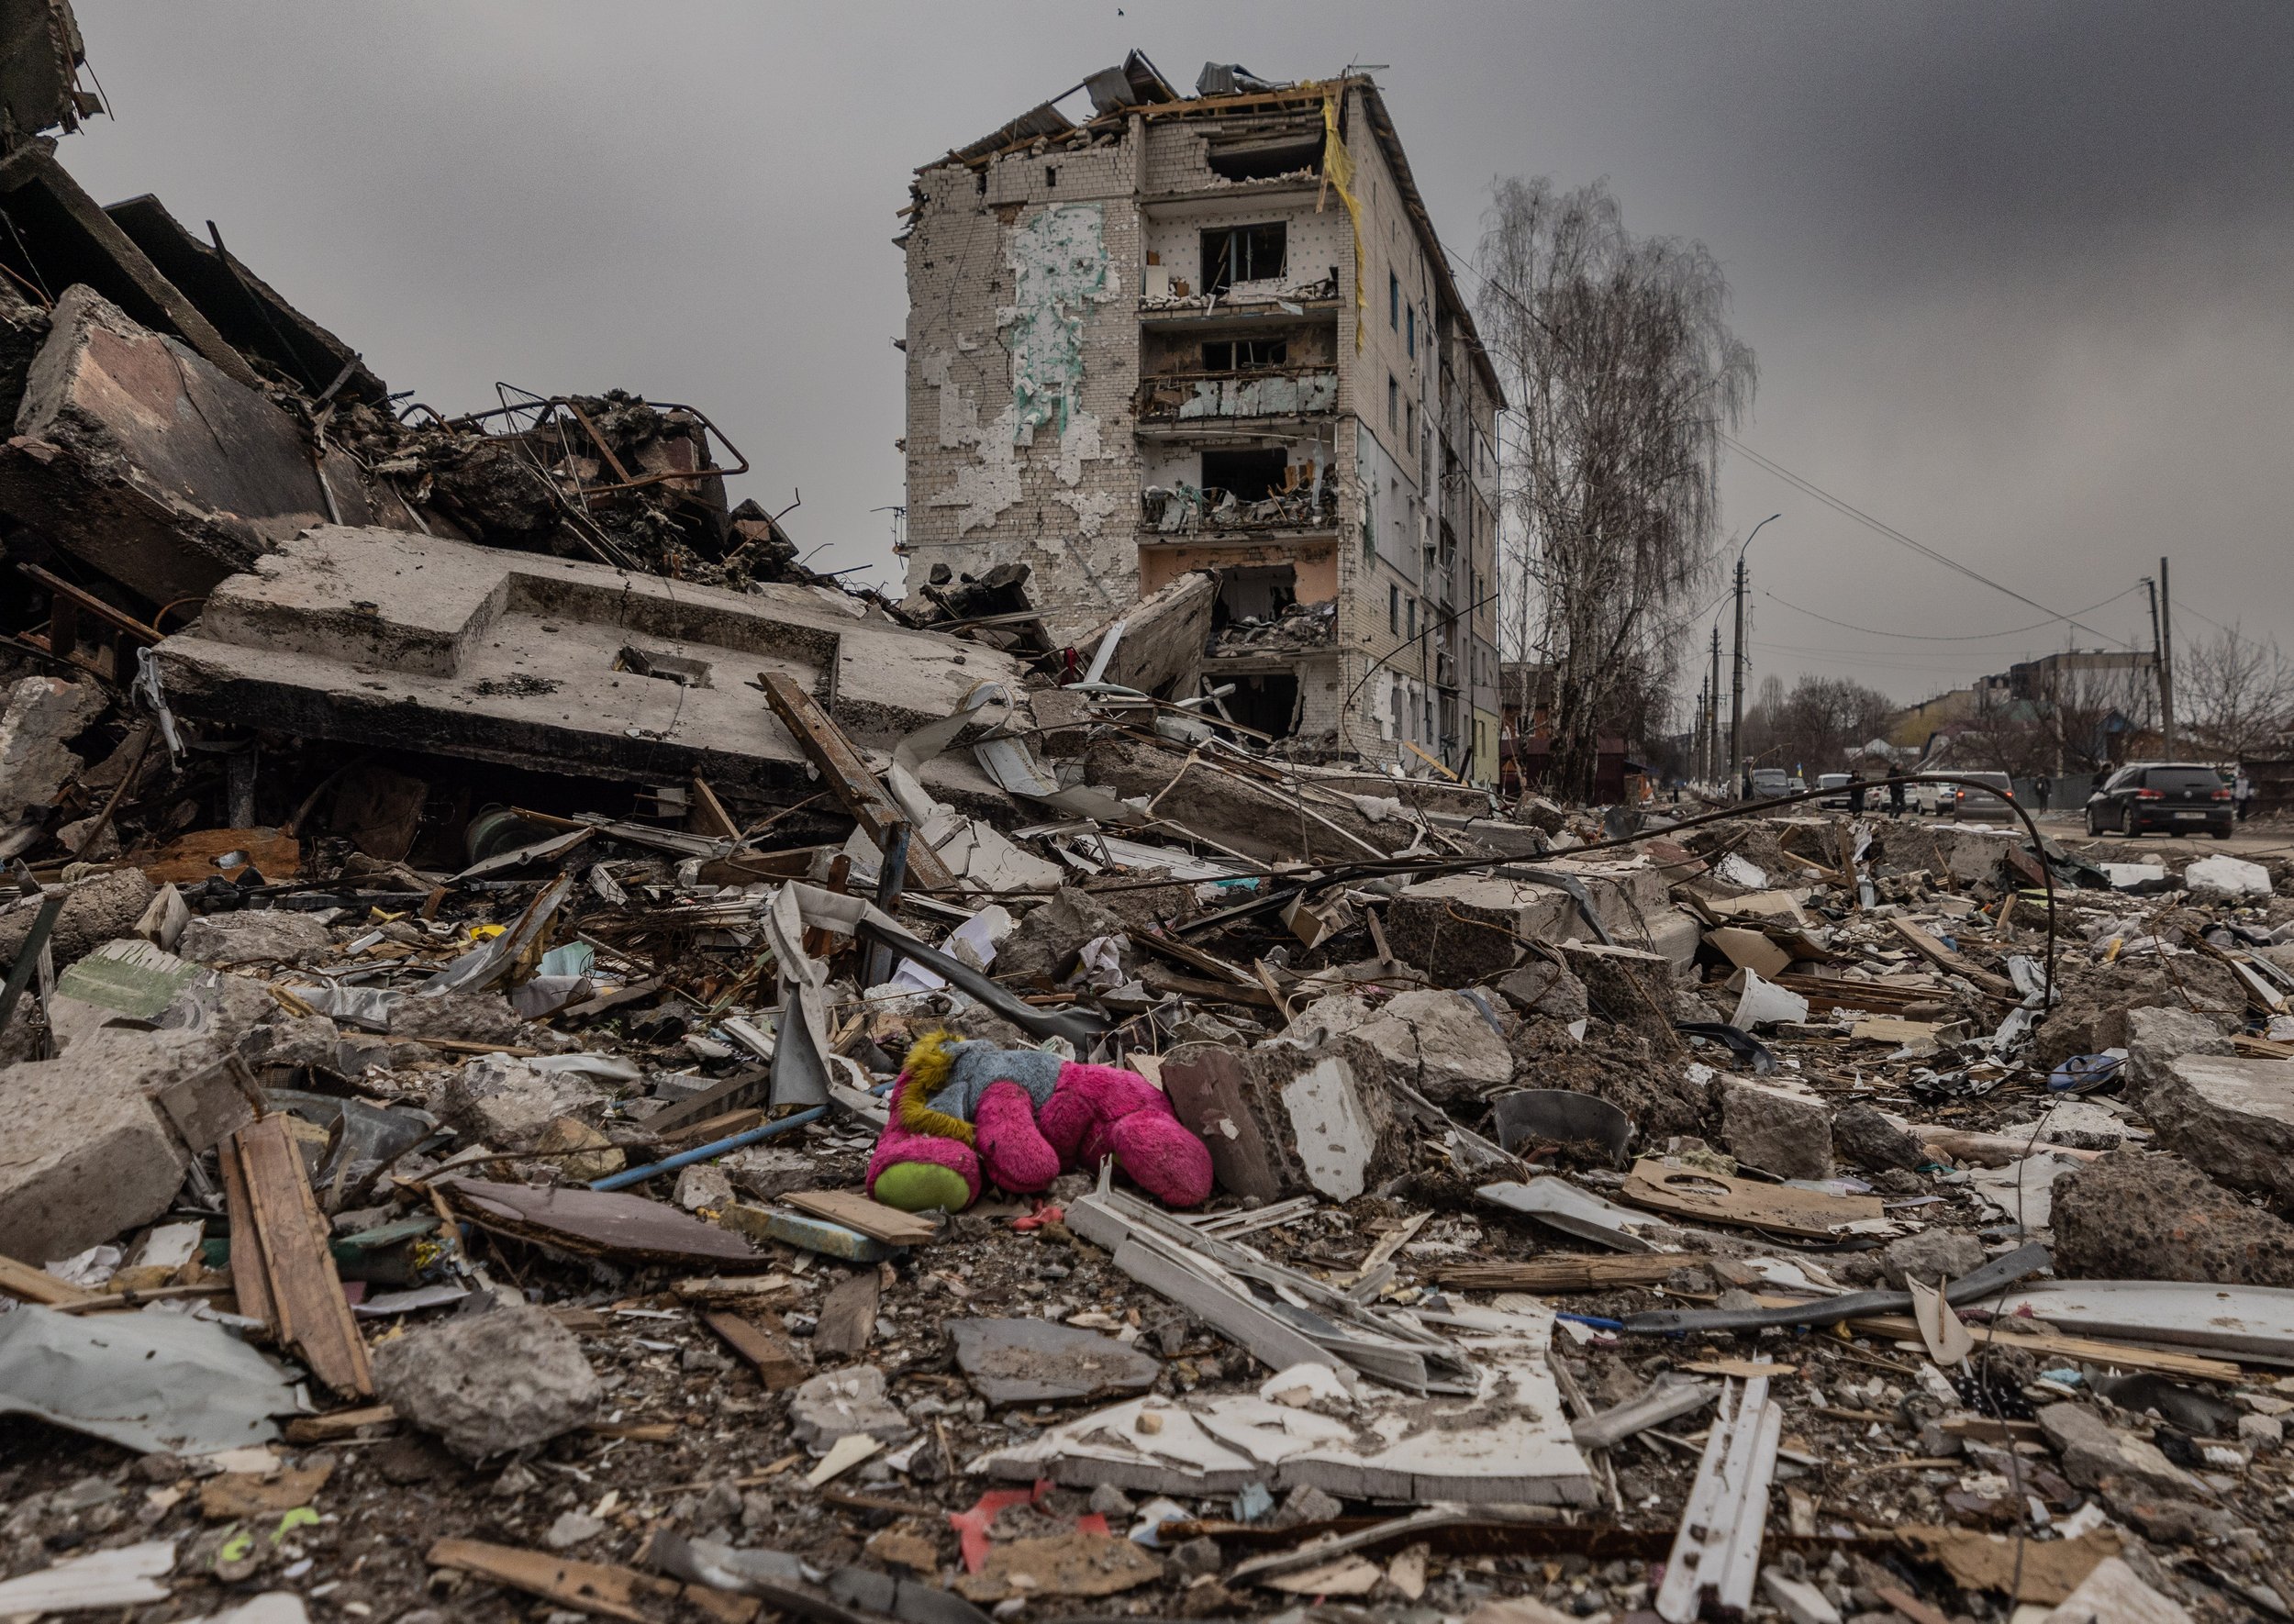  A child’s toy sits in the ruins of Bordoyonka- a destroyed city outside Kyiv, Ukraine’s capital.   